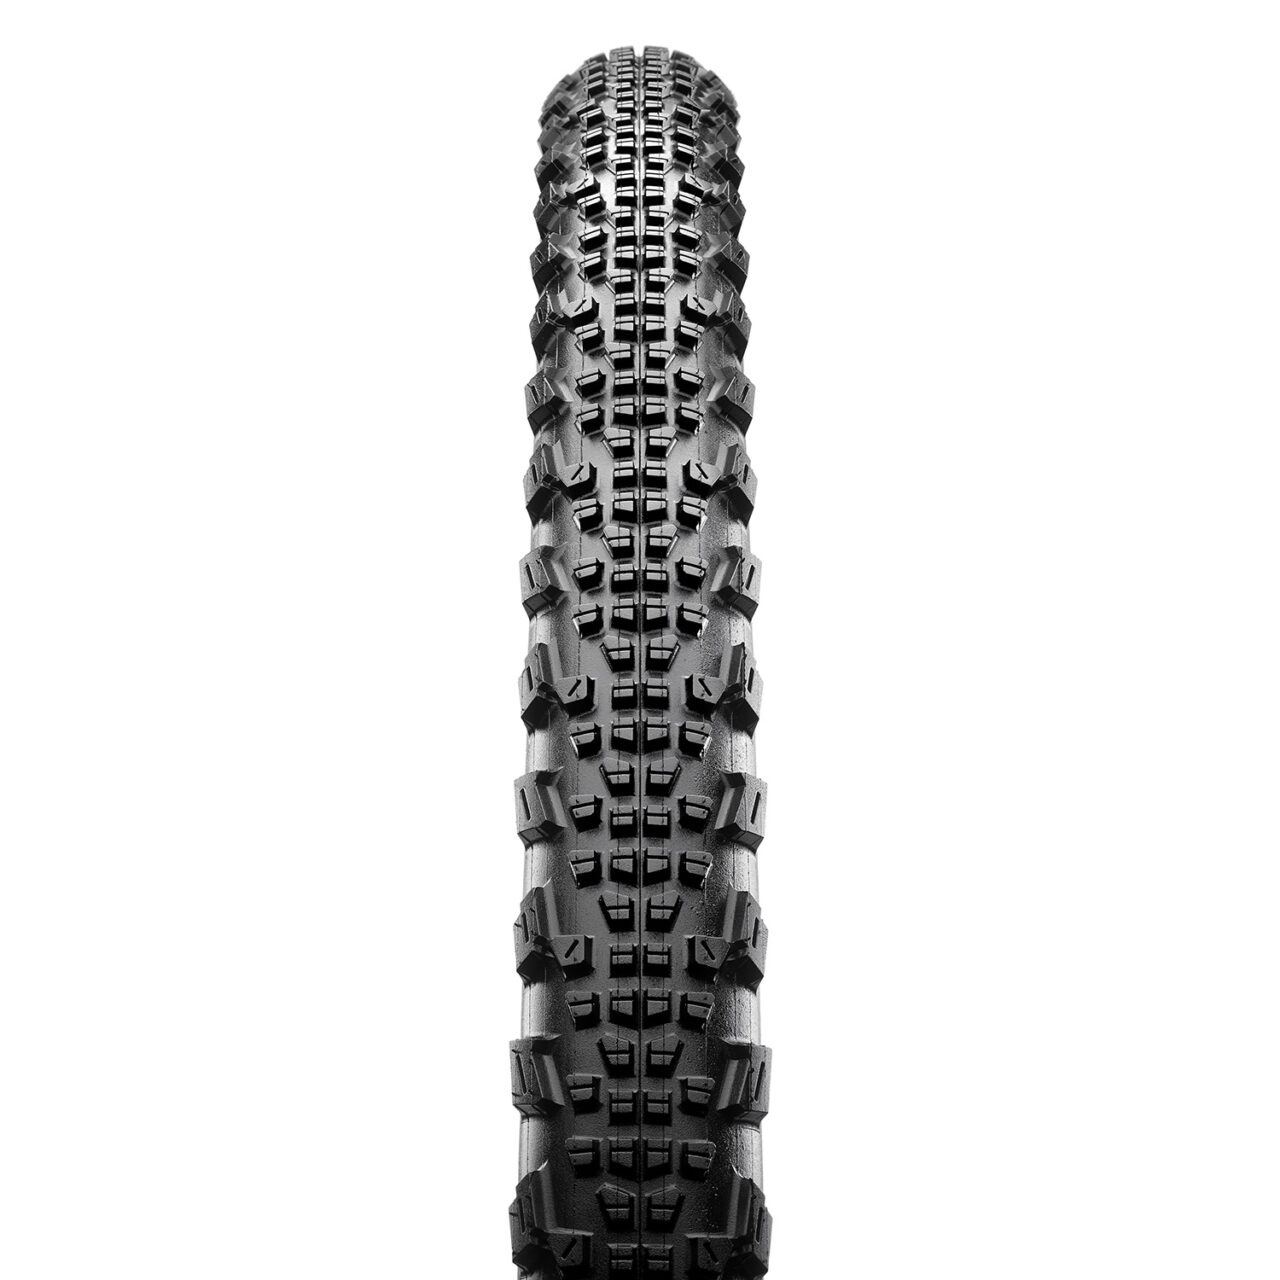 Maxxis Ravager bicycle tire tread